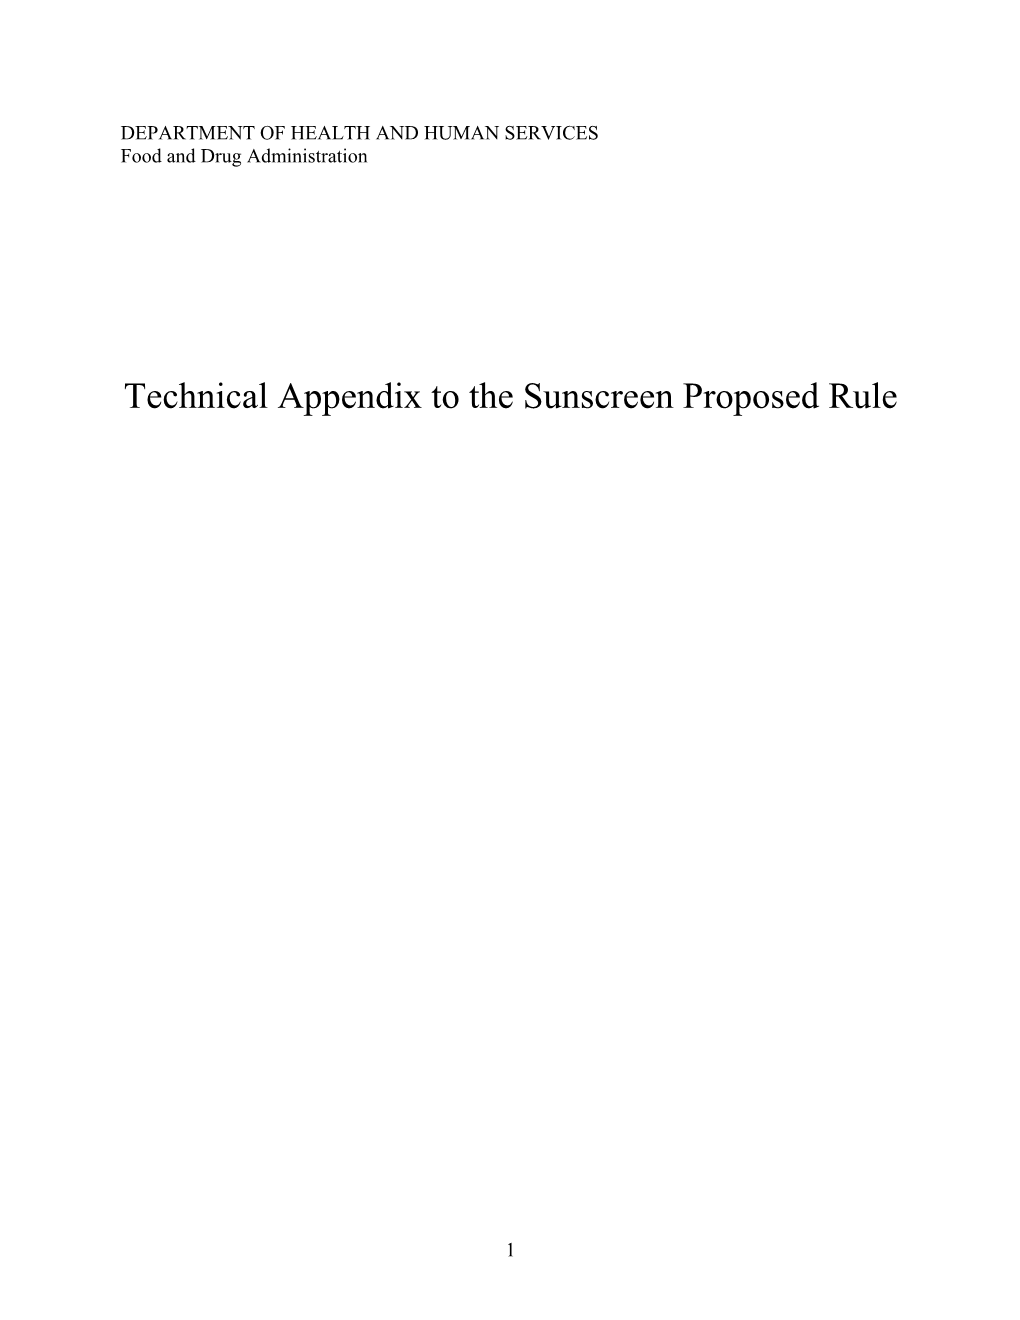 Technical Appendix to the Sunscreen Proposed Rule